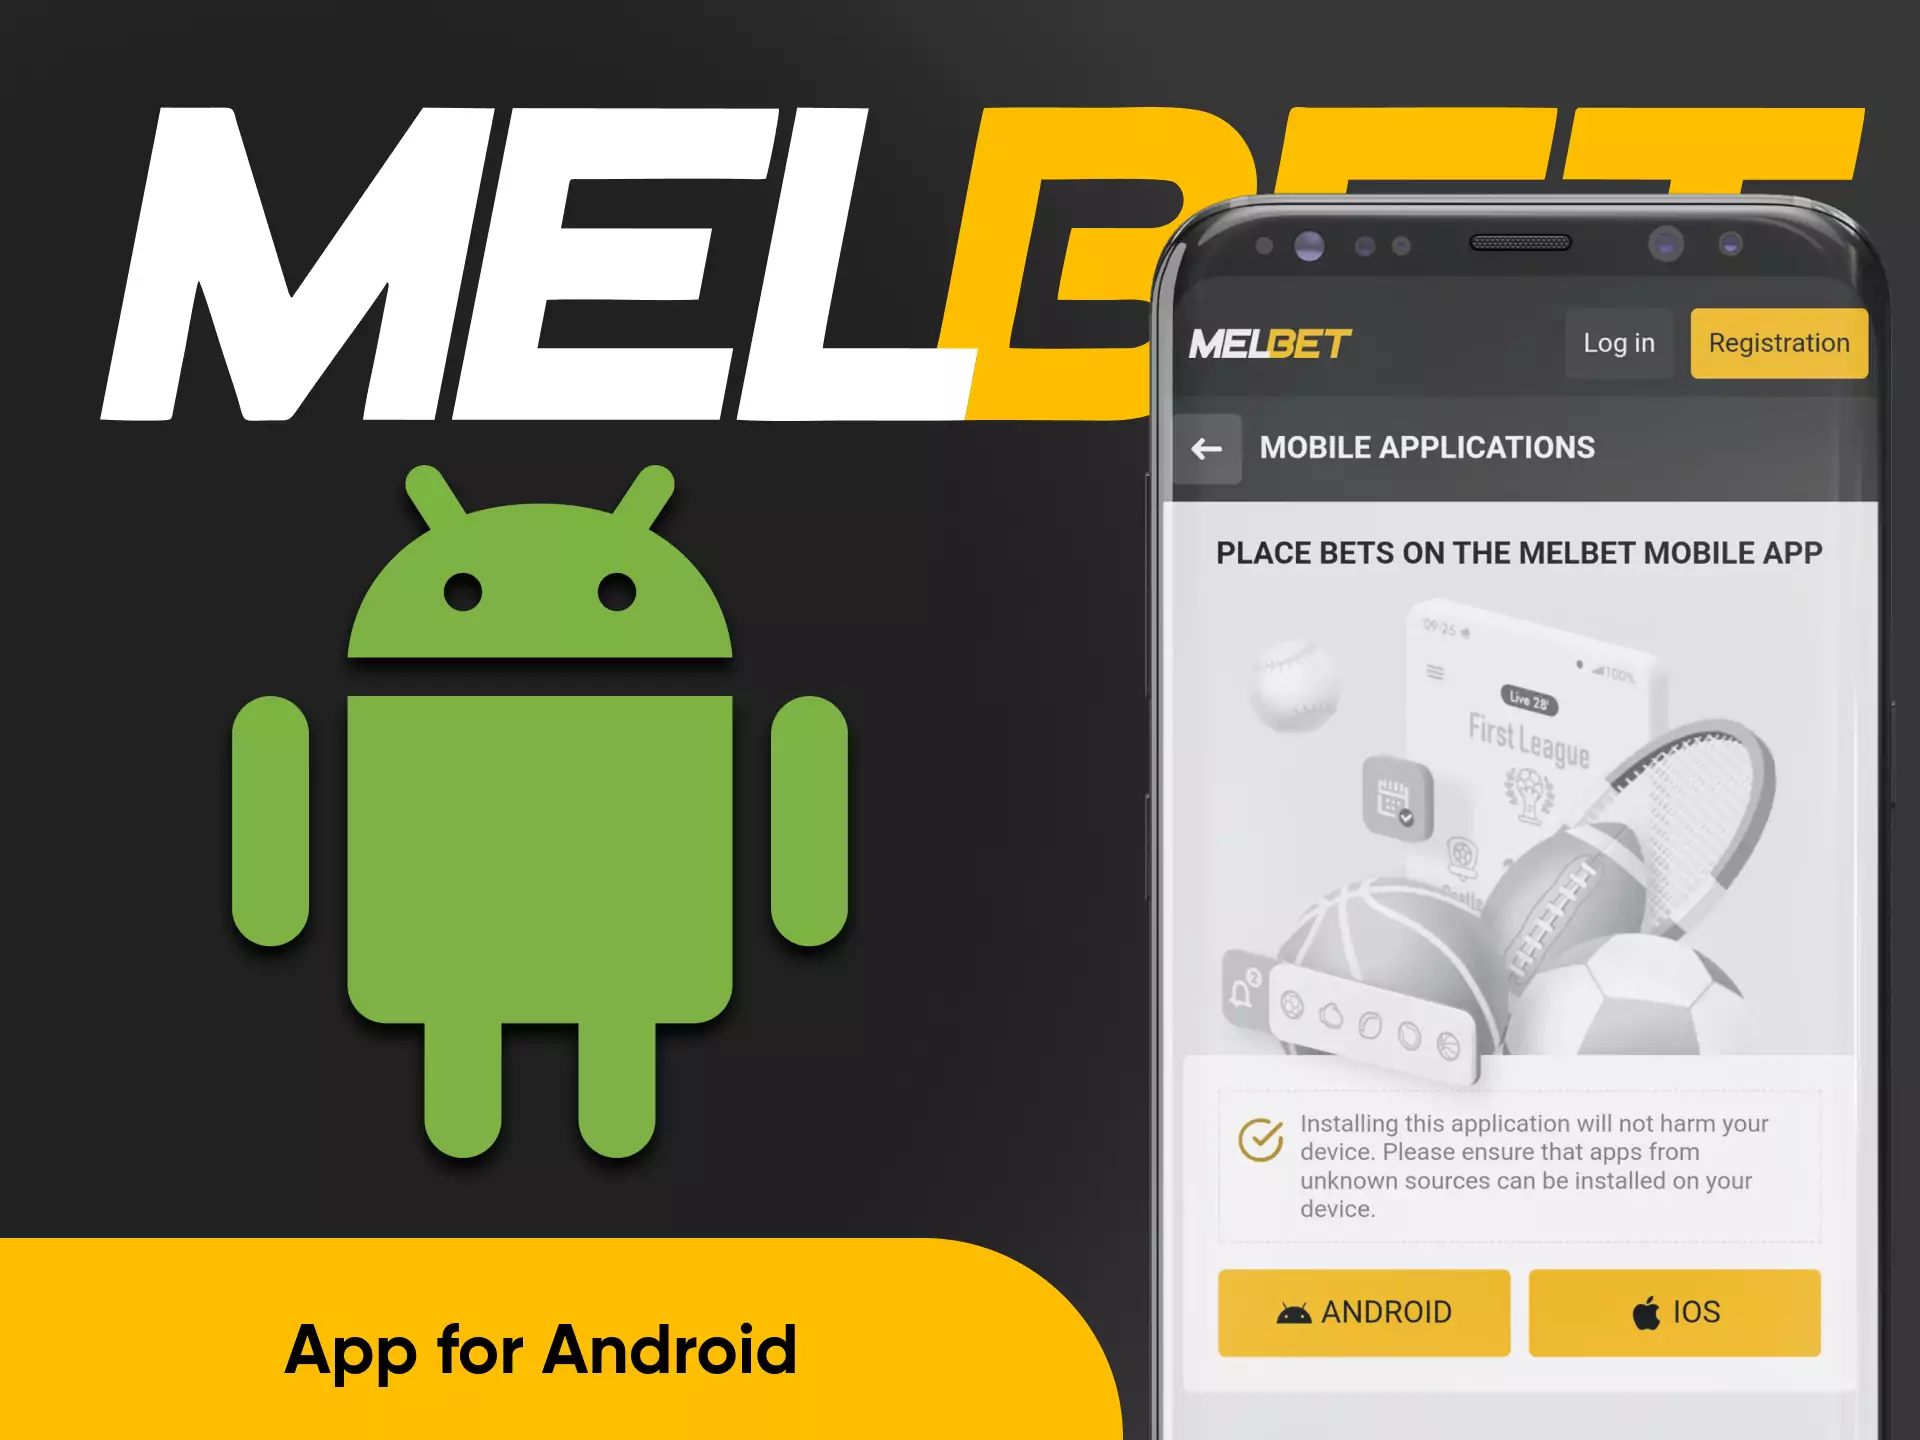 For Android devices, there is an apk file on the Melbet official site.